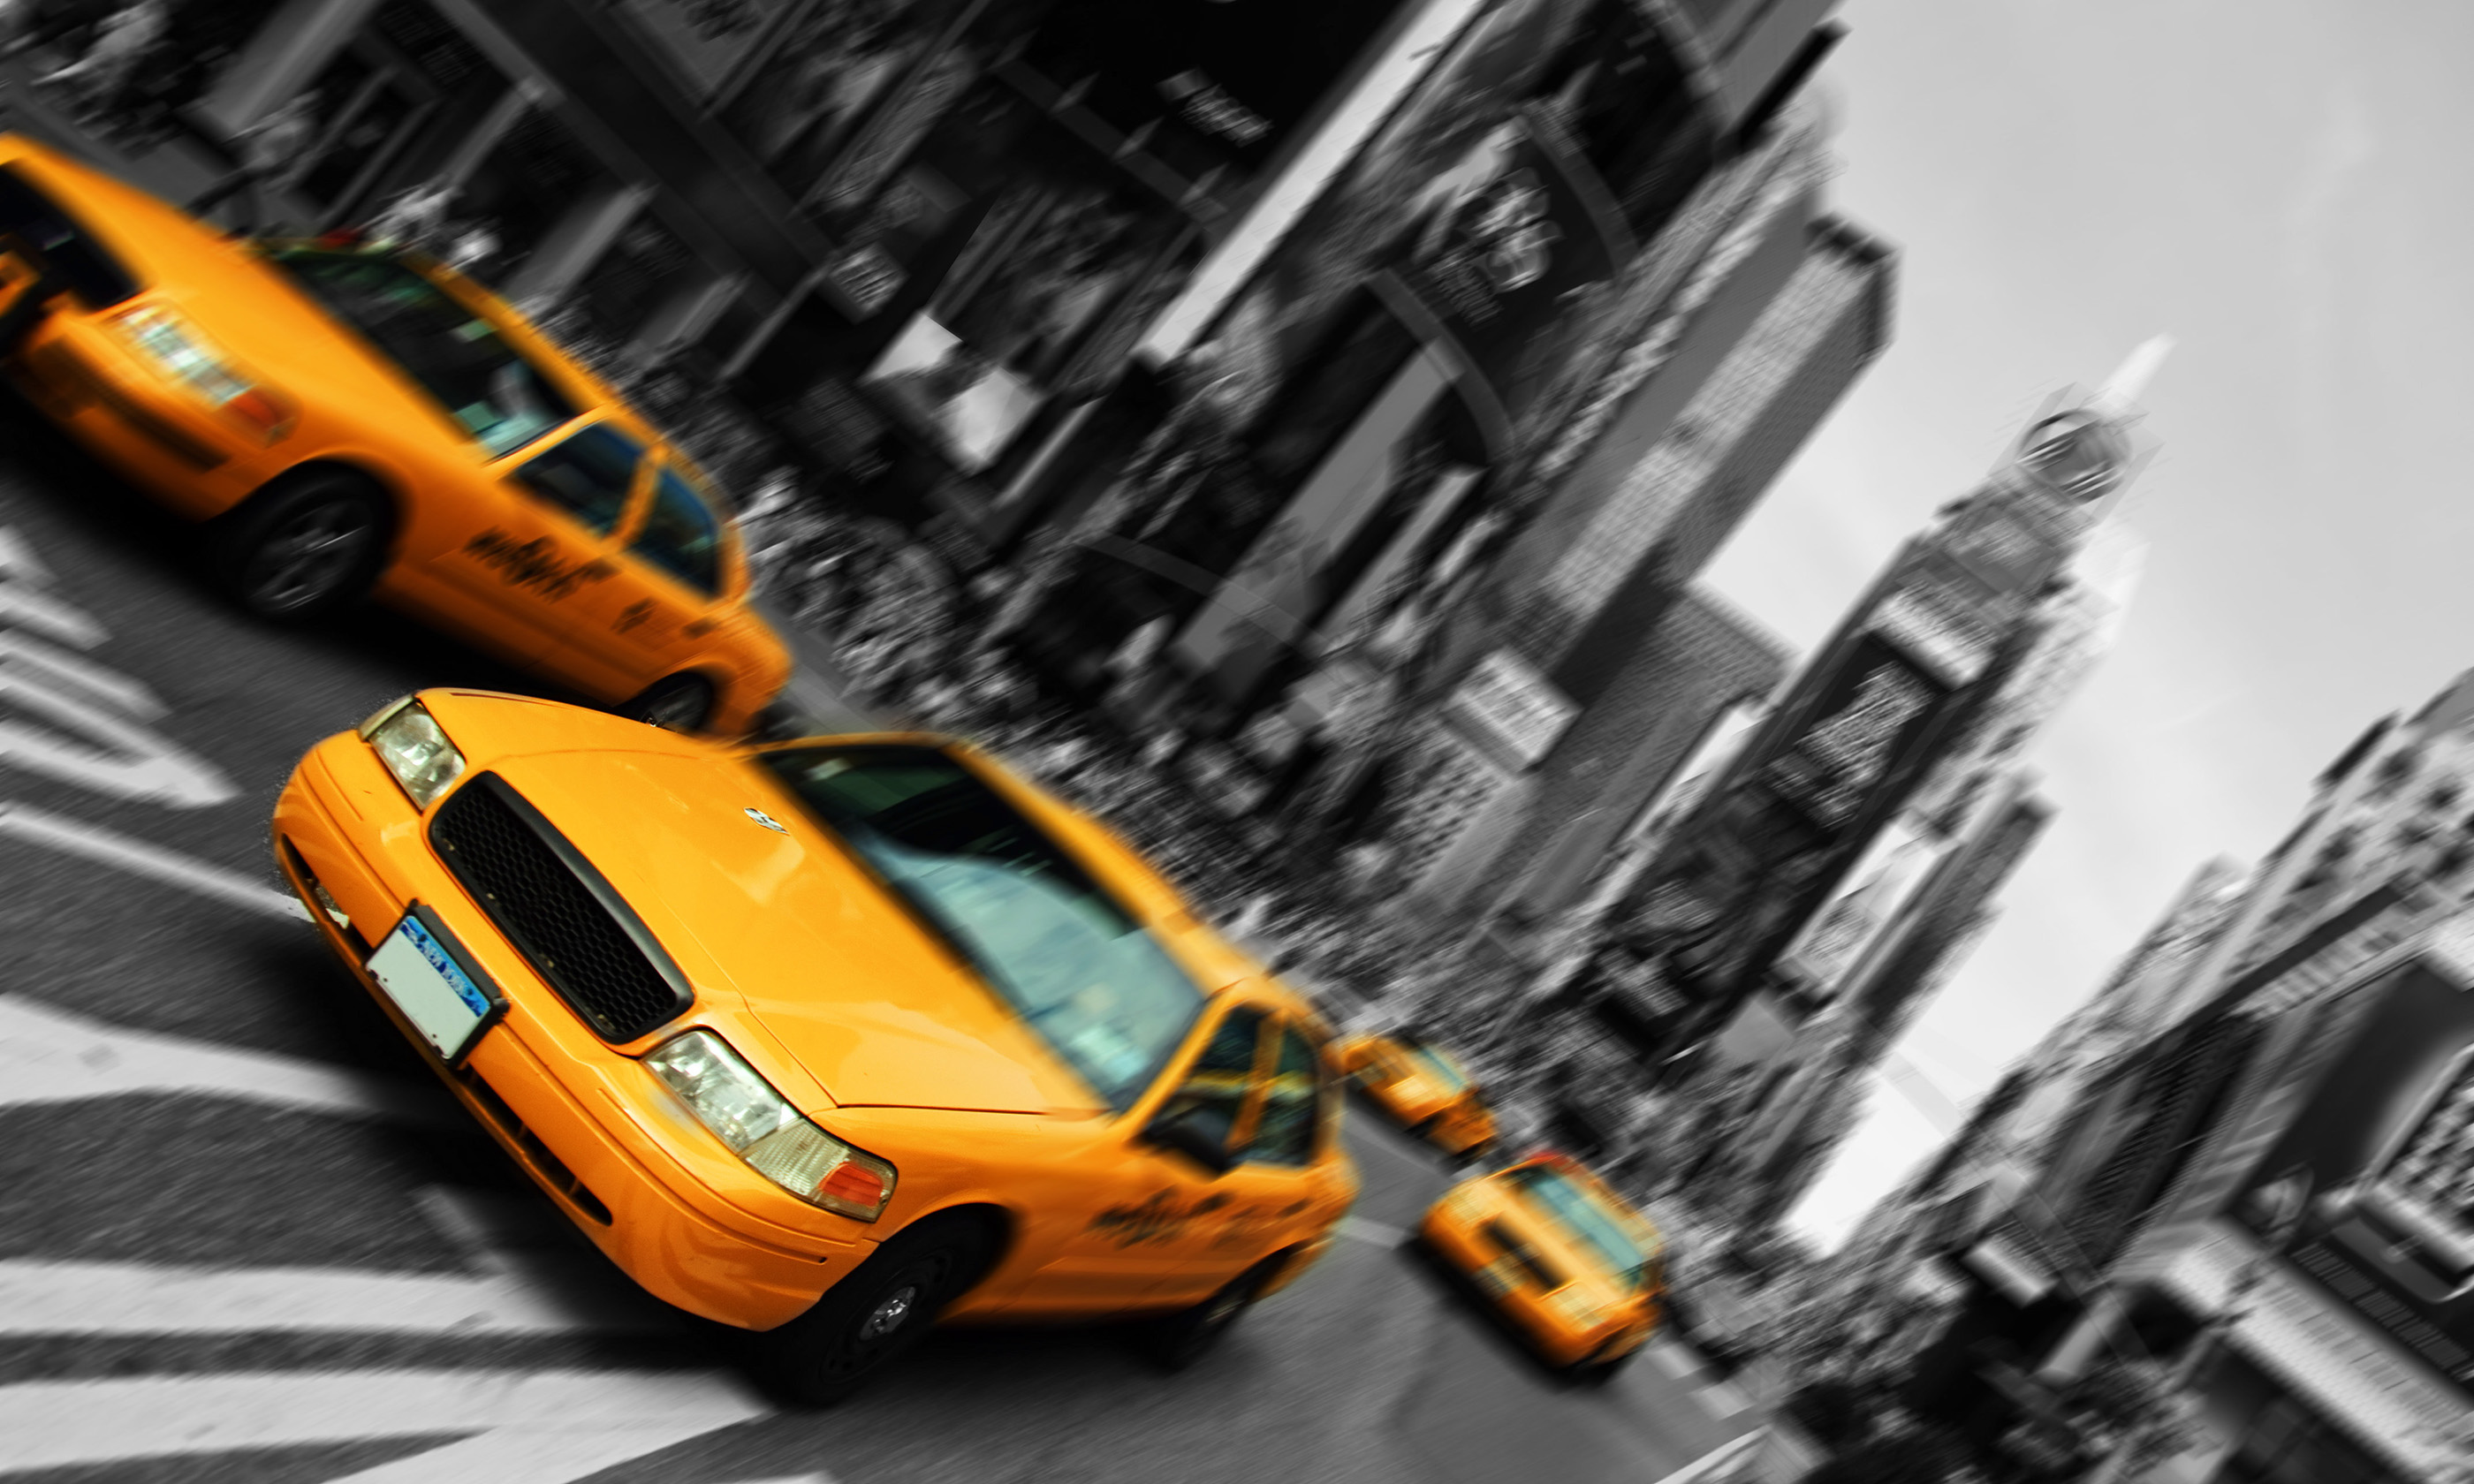 New York cabs in Times Square (Shutterstock.com. See credit below.)